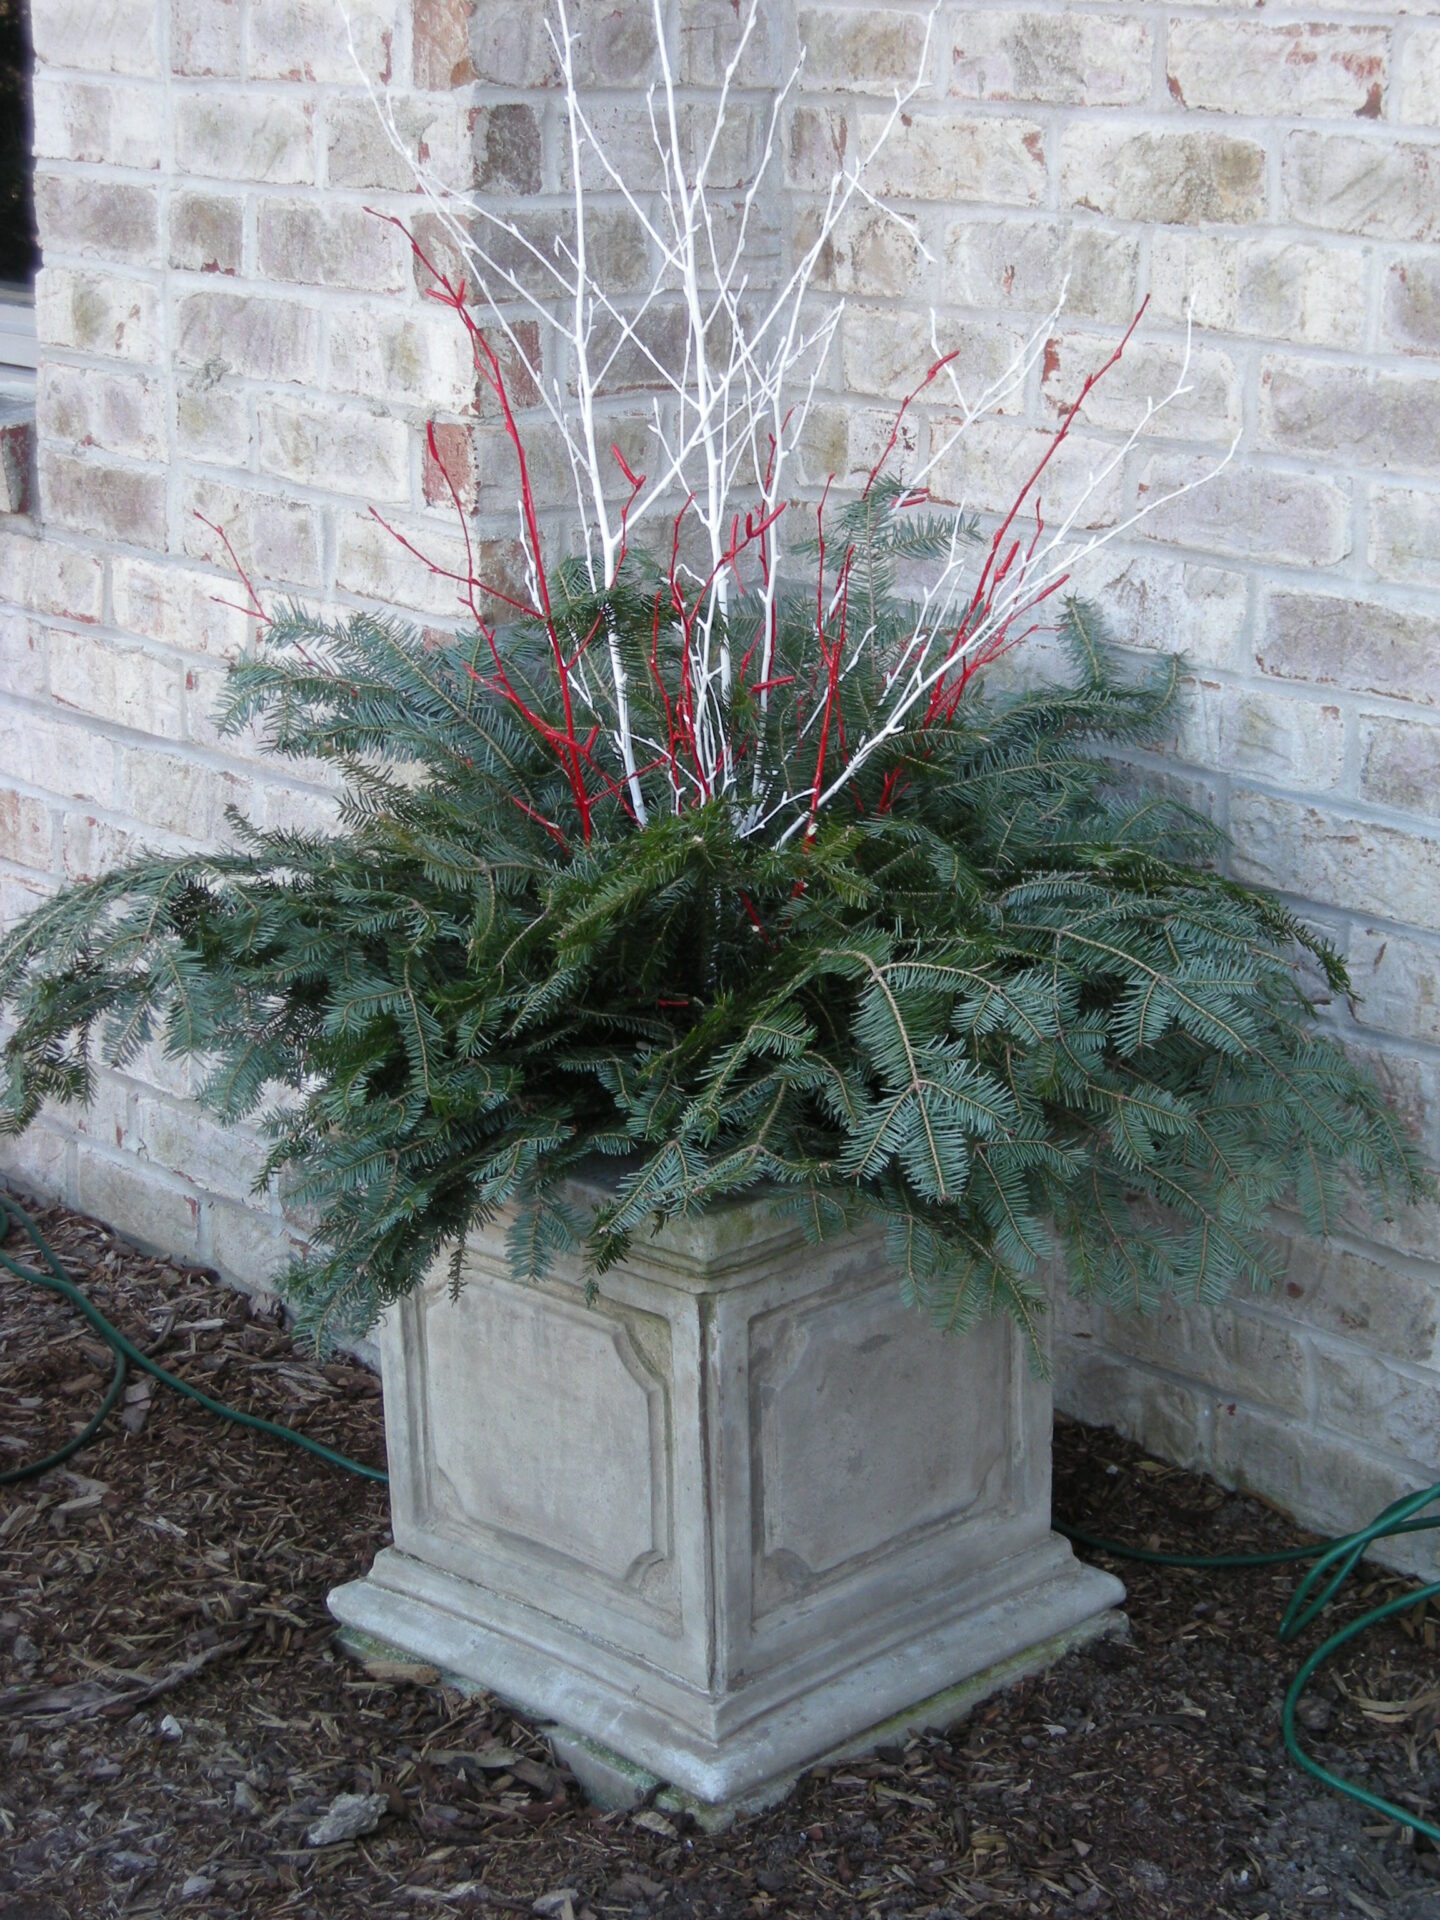 An ornamental planter with green ferns and decorative red and white branches is set against a brick wall, creating a festive outdoor display.